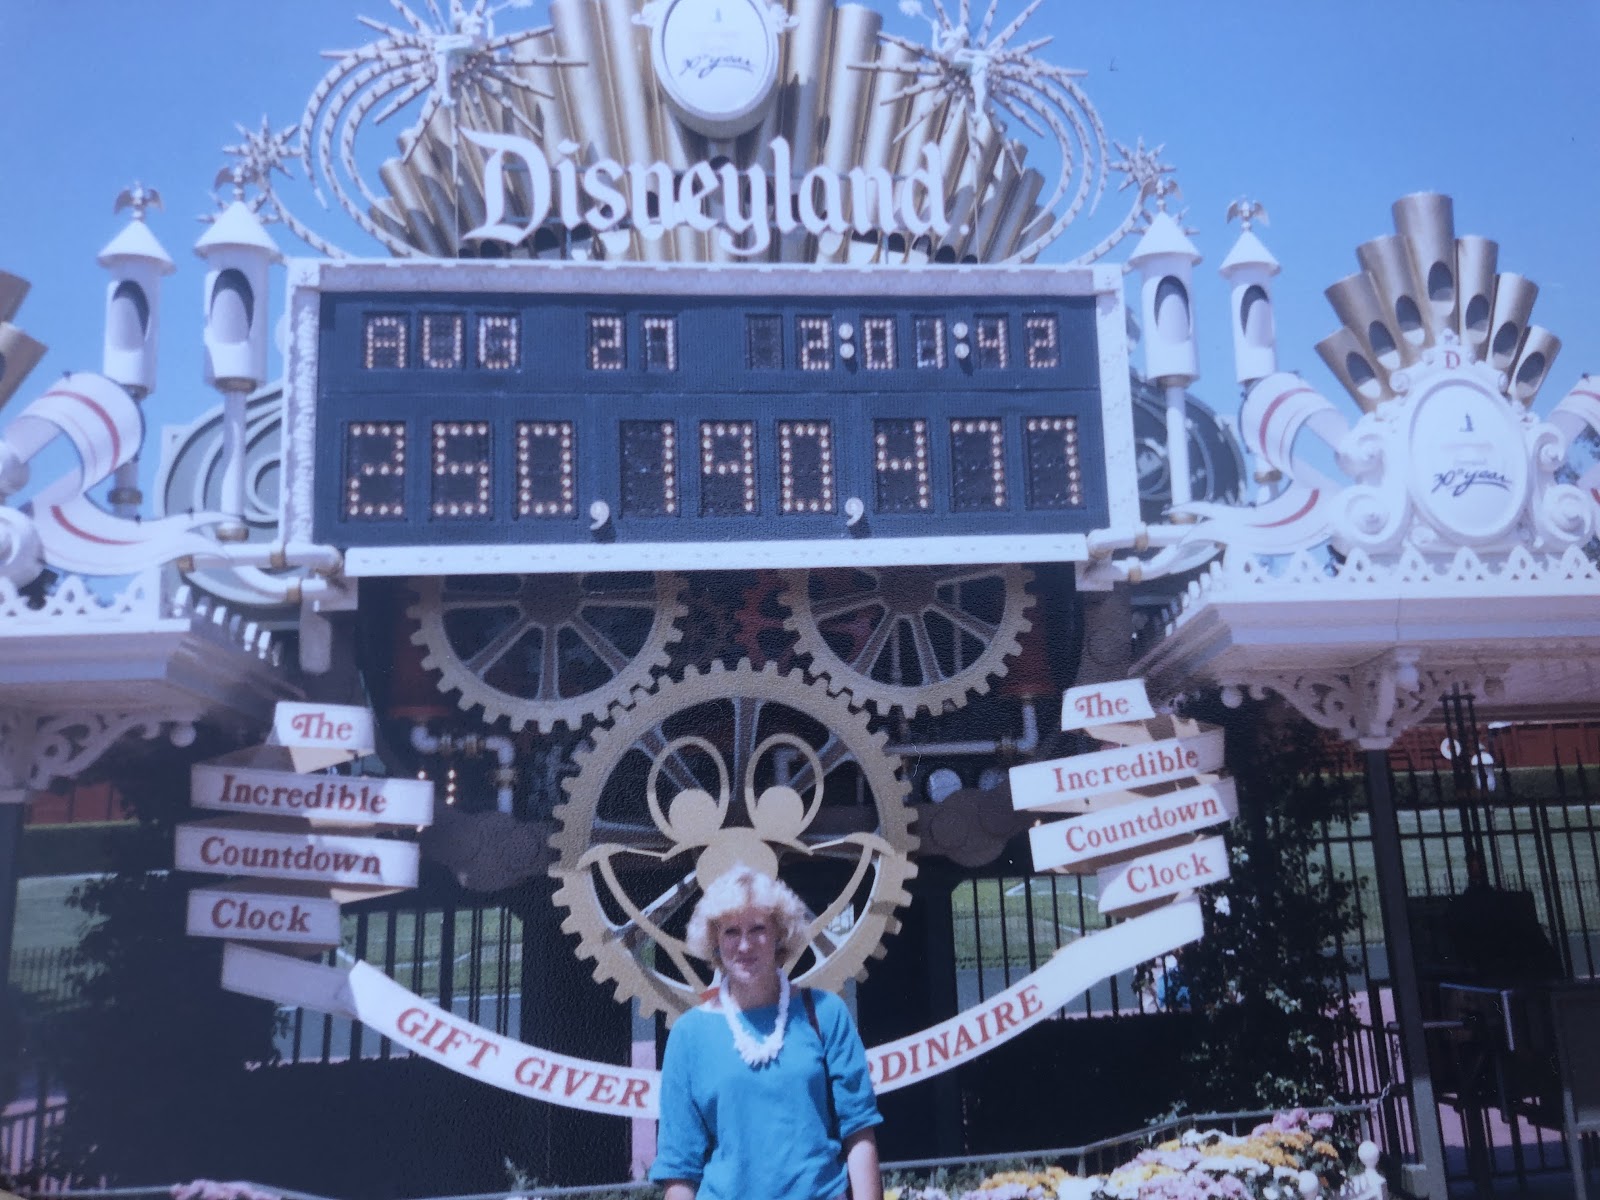 disneyland-guest-uses-return-ticket-won-as-prize-for-30th-anniversary-in-1985.jpeg